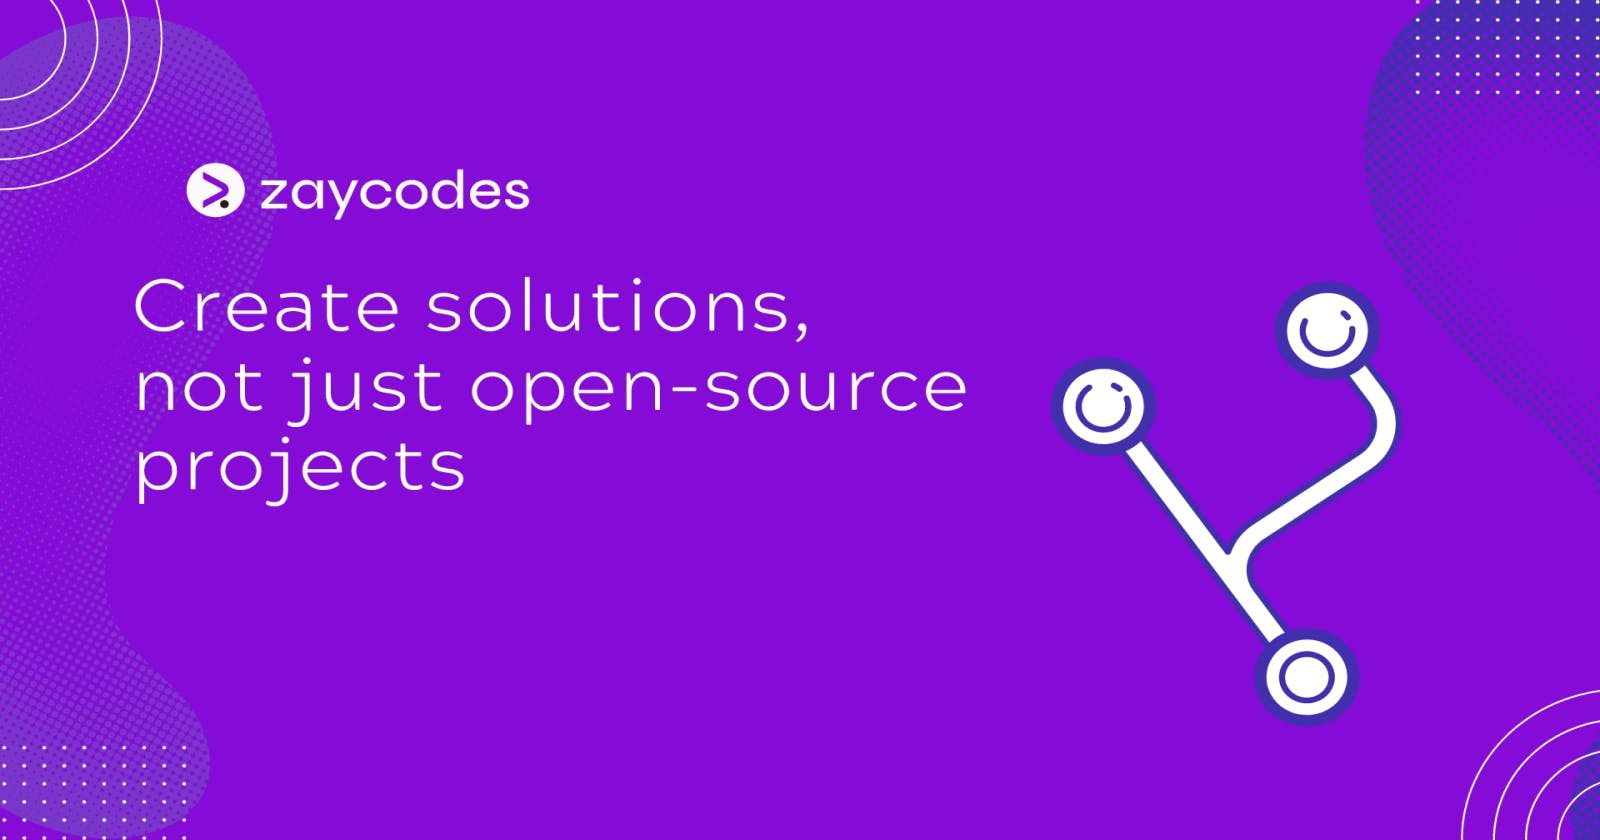 Create solutions, not just open-source projects